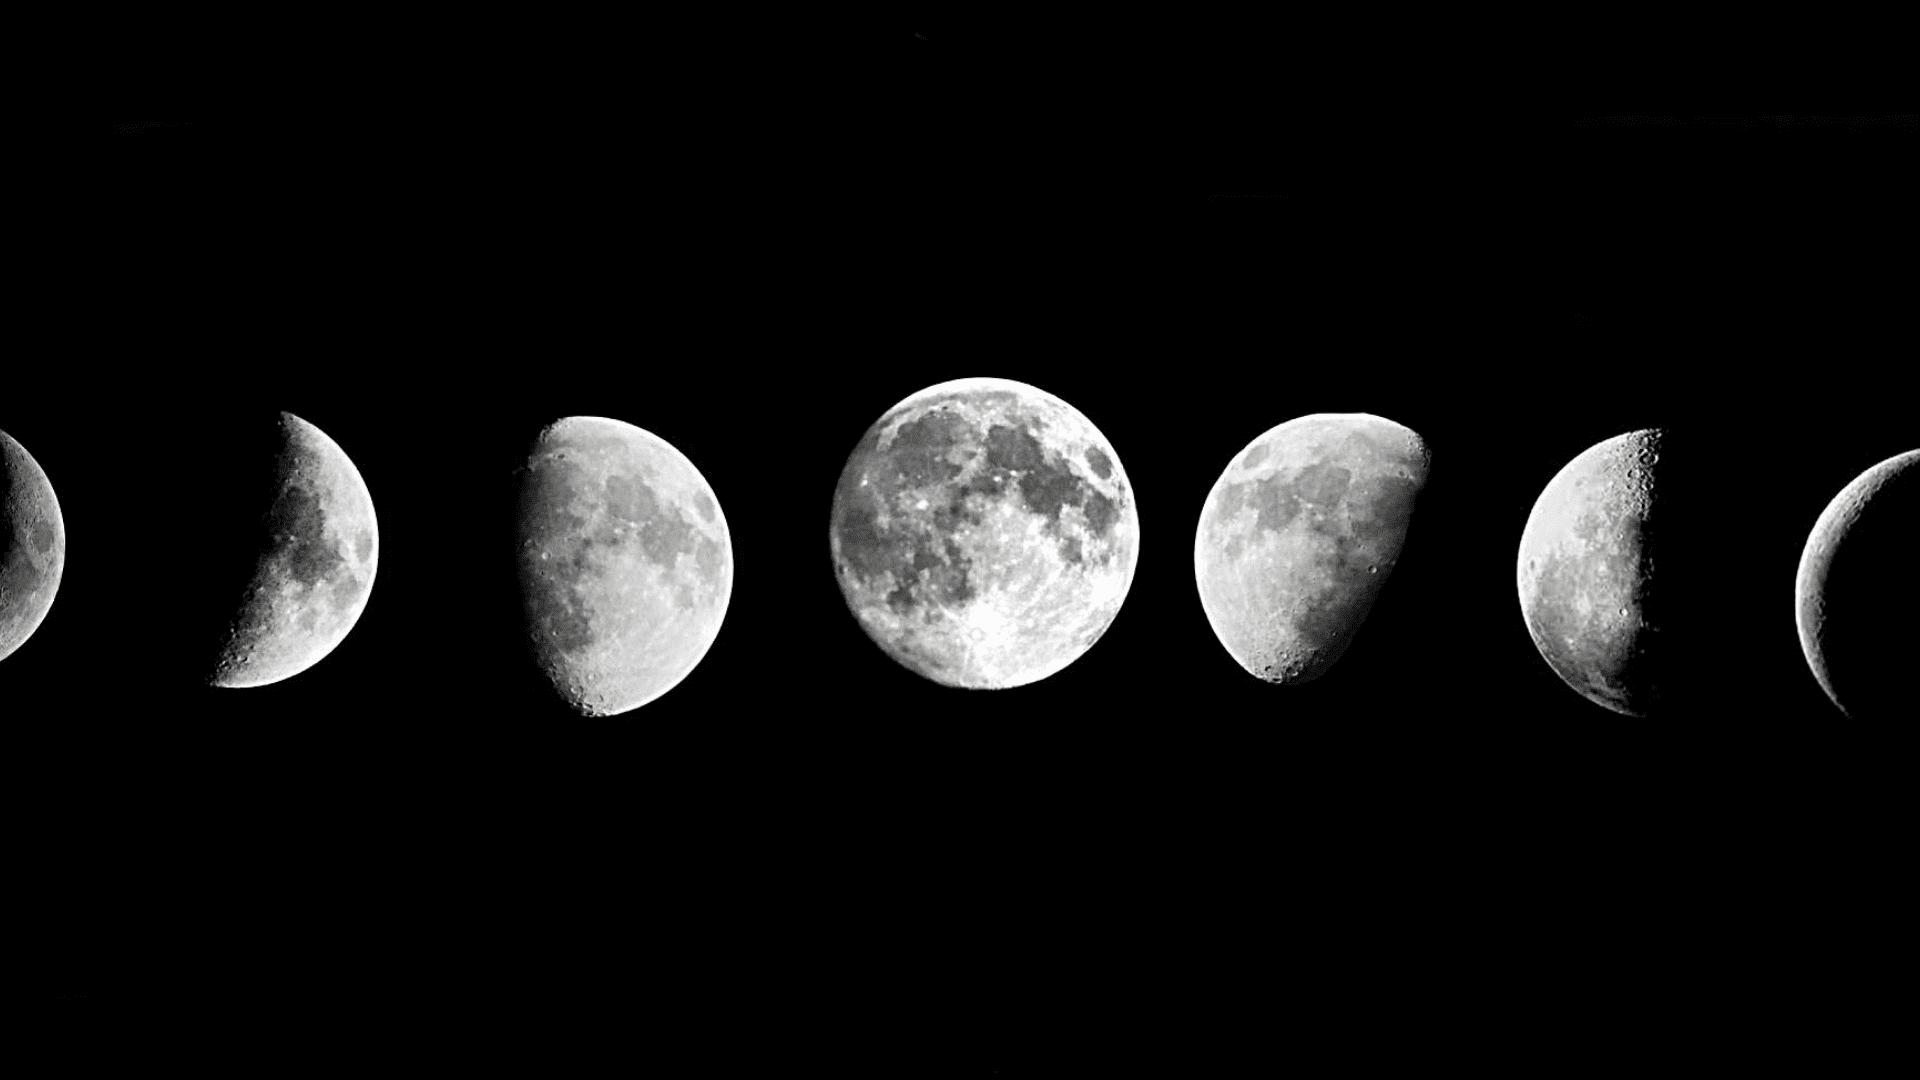 Phases of the moon against a black backdrop